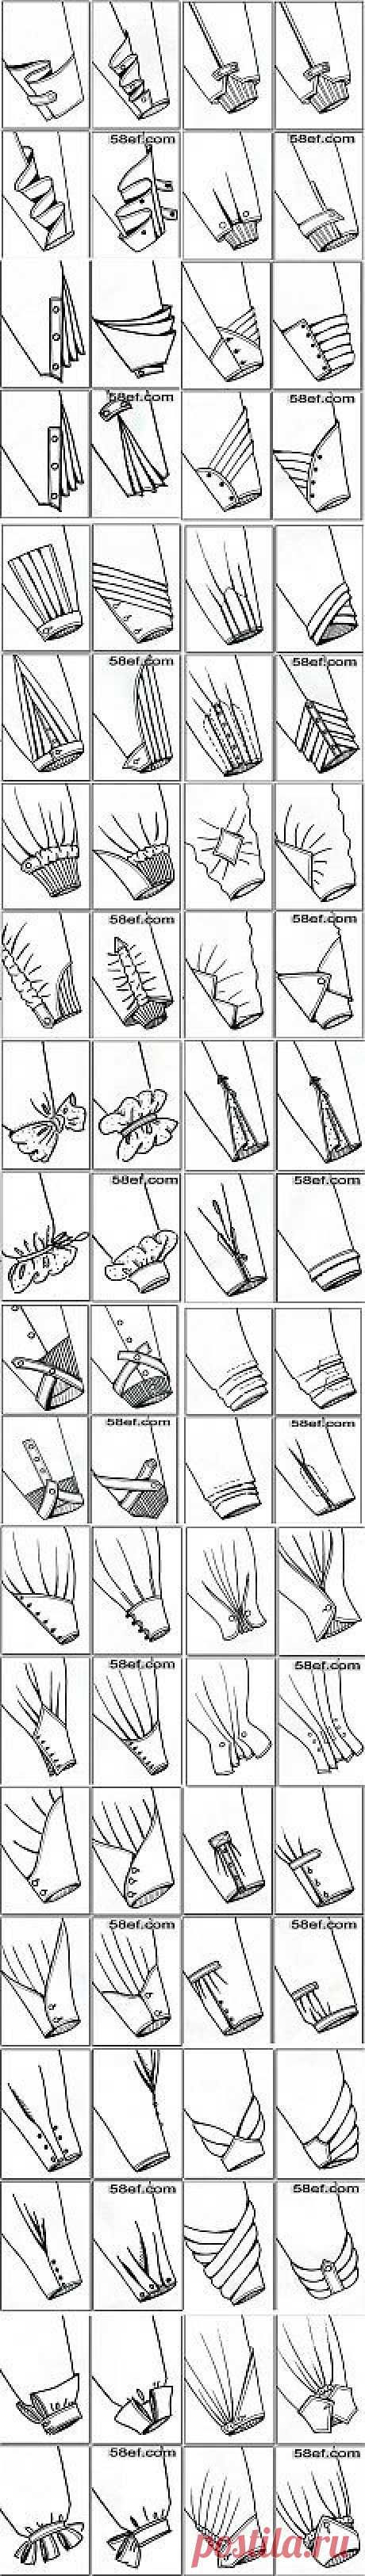 Ways to End Sleeves _ Extensive Diagrams of Ways to End a Sleeve  __________________________ НИЗ РУКАВА